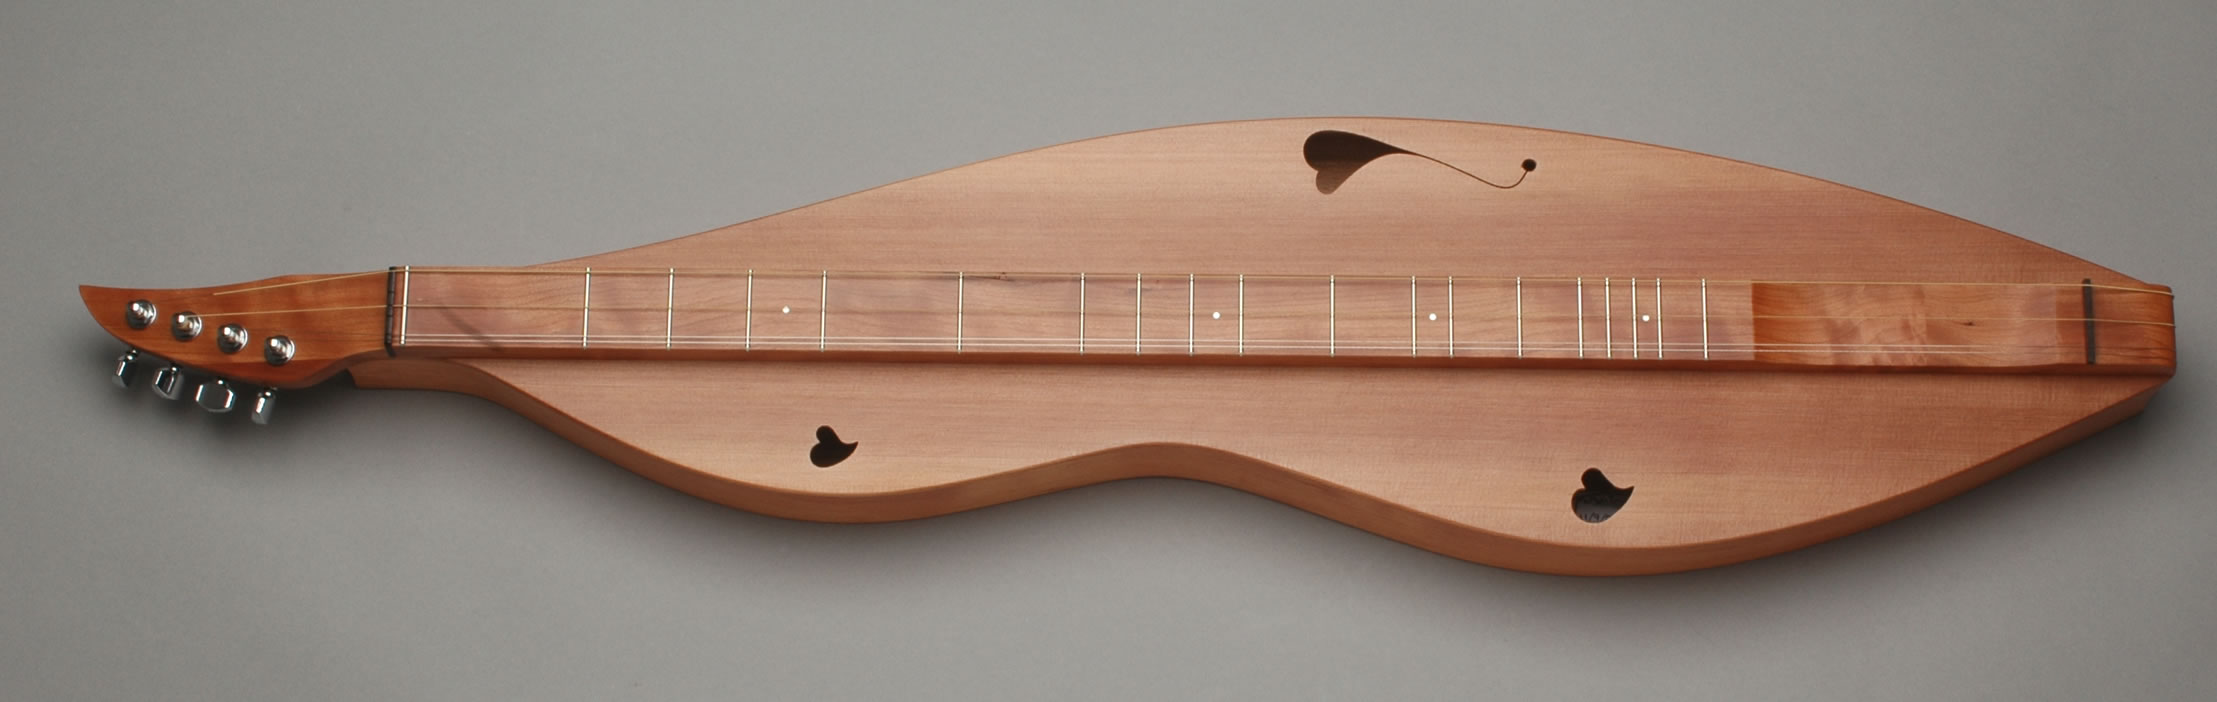 Click here for larger view of Ron Ewing's Baritone Dulcimer